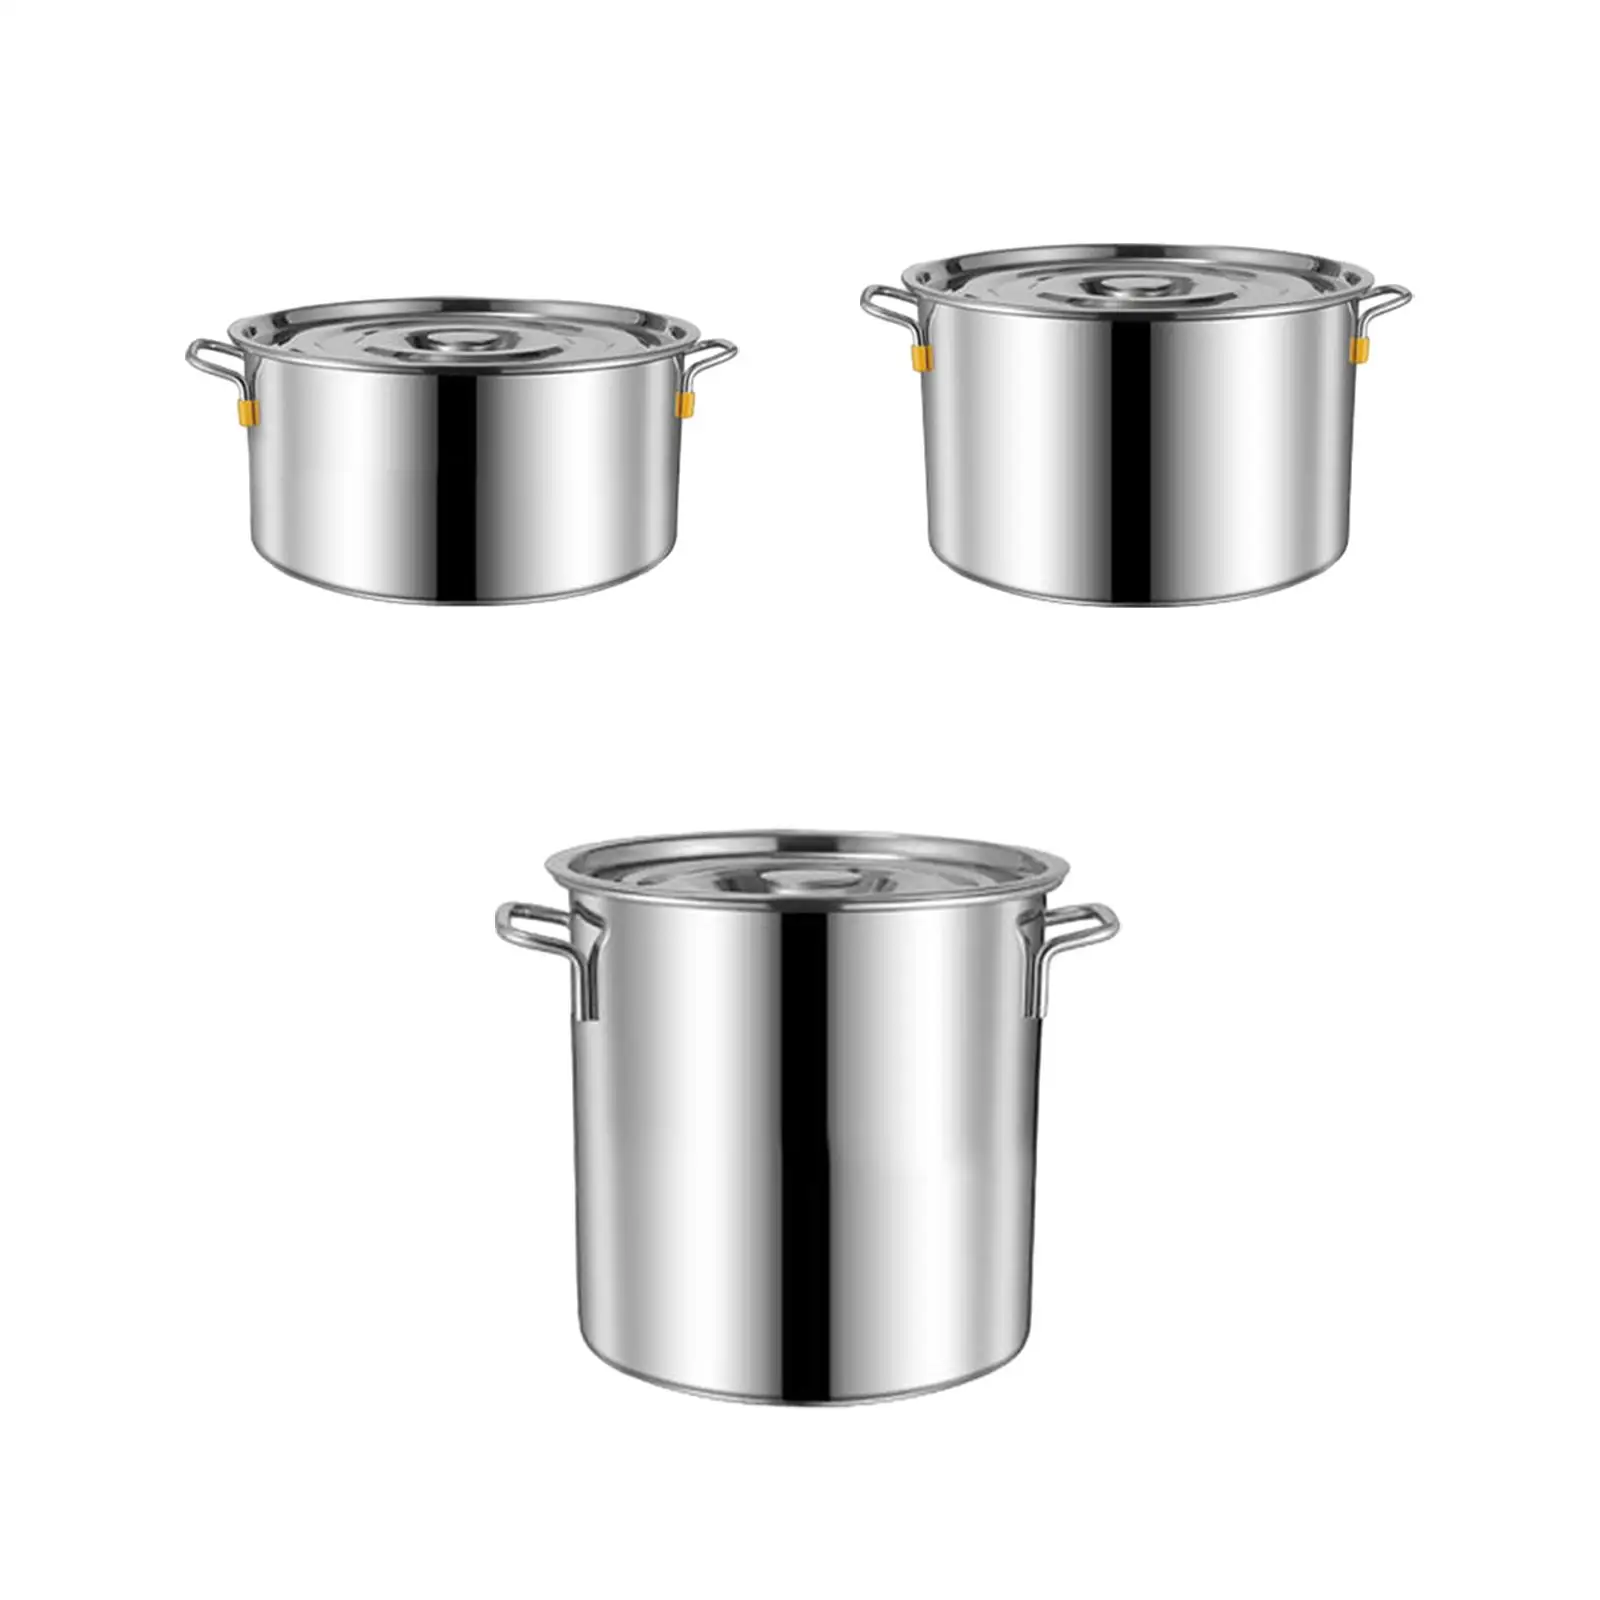 Stainless Steel Soup Pot Round Oil Bucket Large Wide Handles Mirror Polished